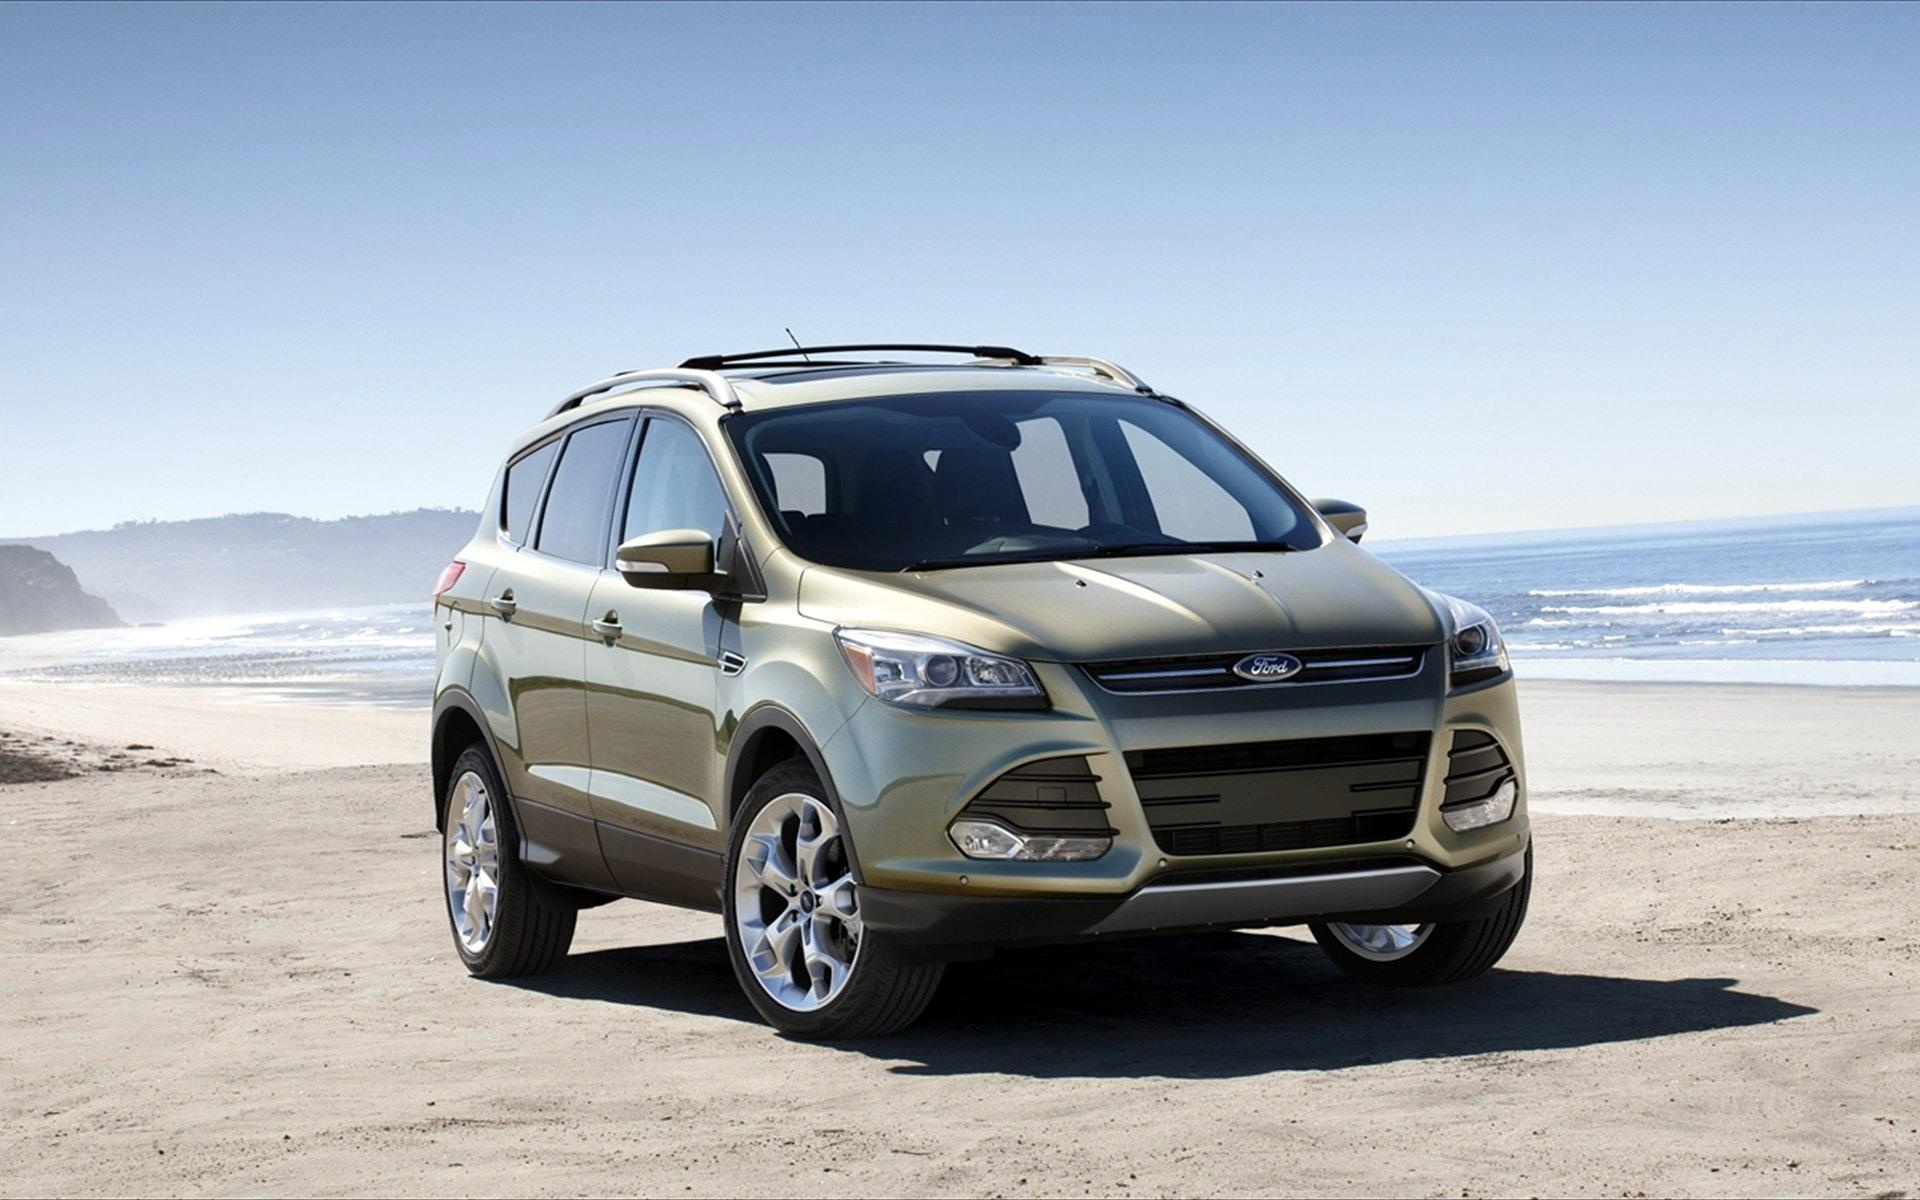 Ford Escape, High-quality wallpapers, Automotive excellence, Backgrounds, 1920x1200 HD Desktop